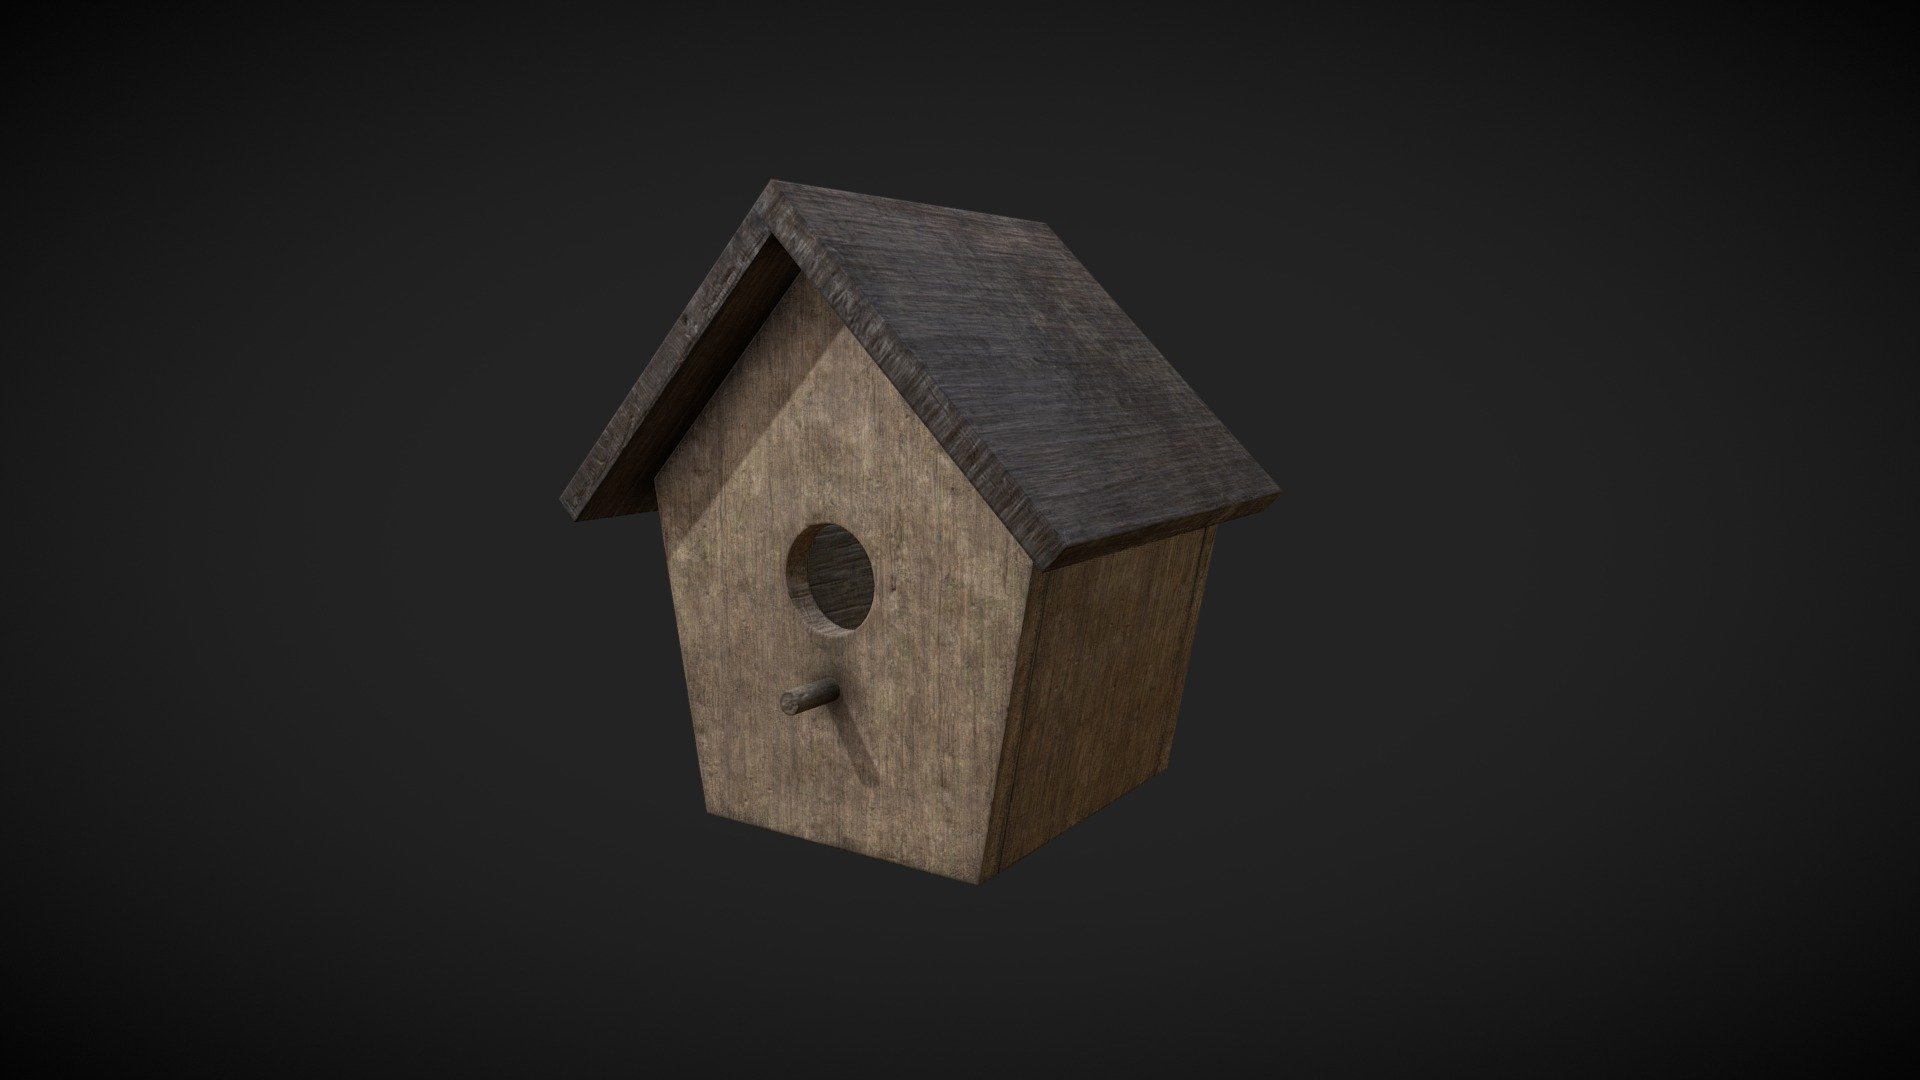 Set consisting of a birdhouse, nest, eggs and poop decals.



Polycount (triangles) LOD0 - LOD3

Birdhouse: 270

Nest:

- Base: 896 - 112

- Straws: 2828

- Egg: 1088 - 136



Textures:

Birdhouse: 2048

Nest Base: 2048

Nest straws: 1024

Poop Decals: 1024
 - Birdhouse & nest - Buy Royalty Free 3D model by Gargore 3d model